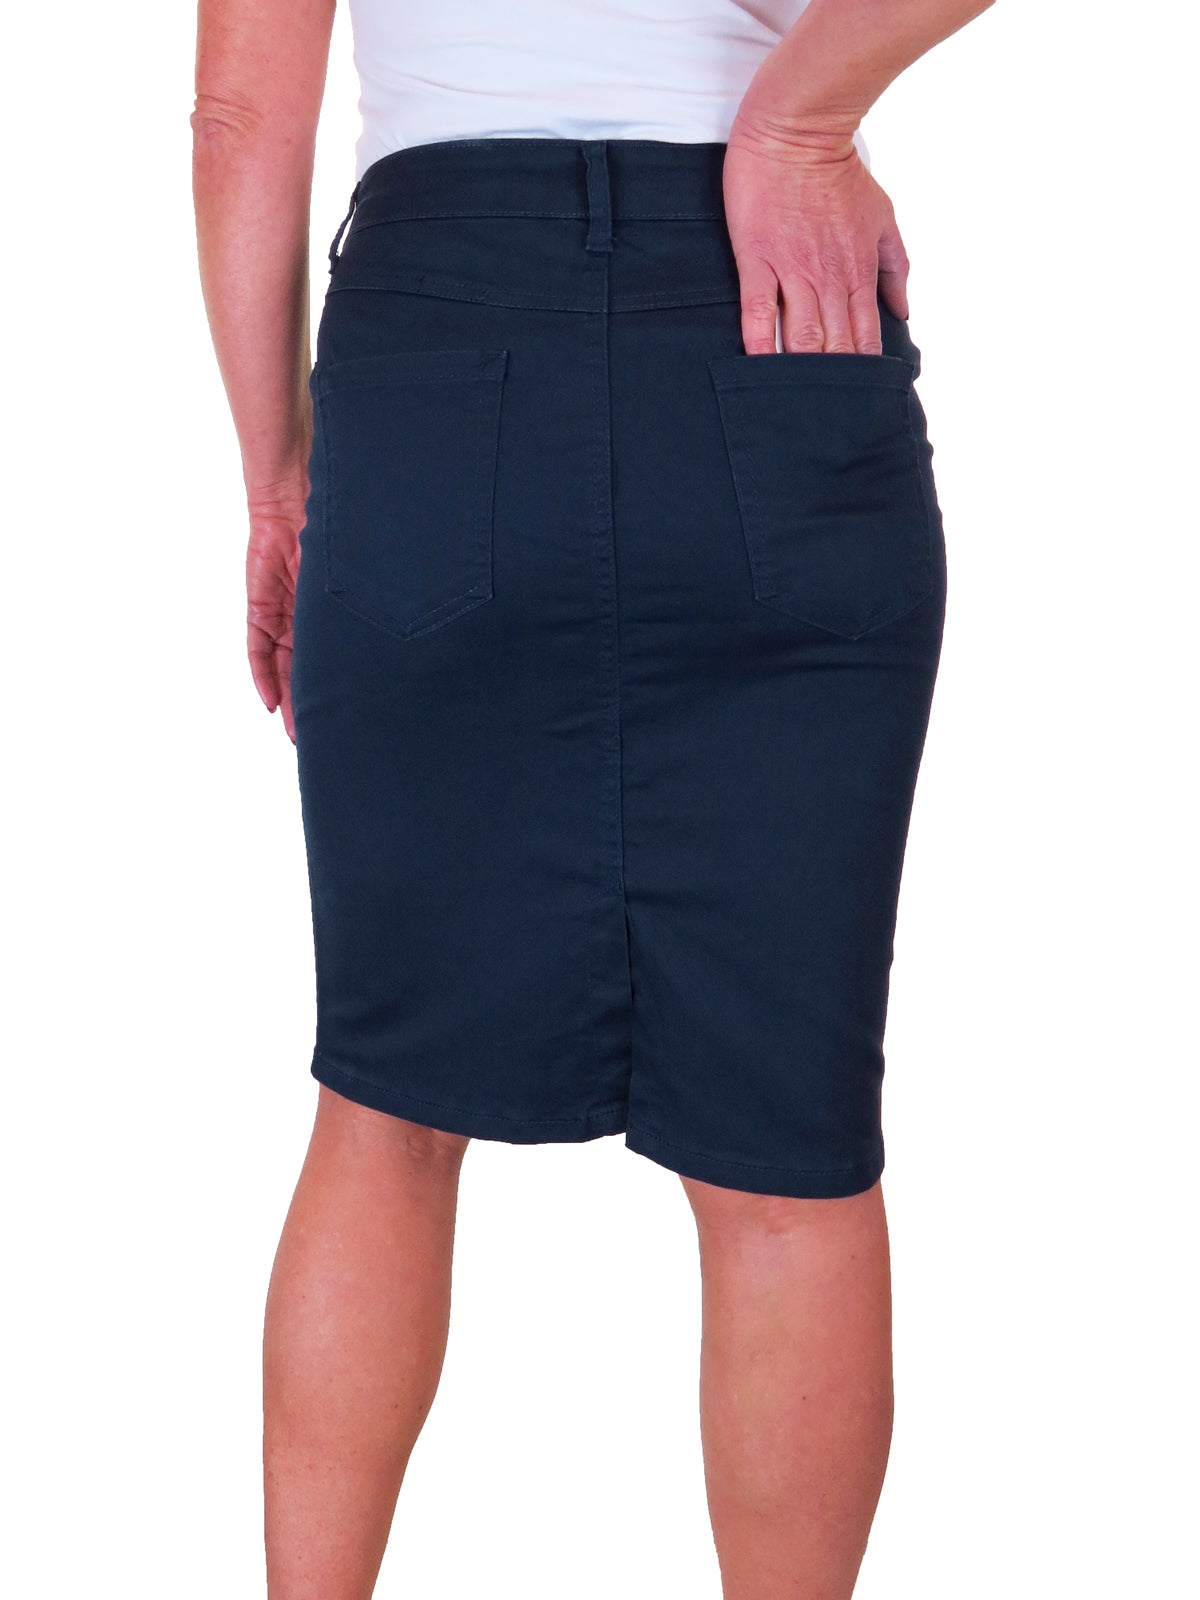 Women's Stretch Jeans Style Heavy Cotton Pencil Skirt Navy Blue